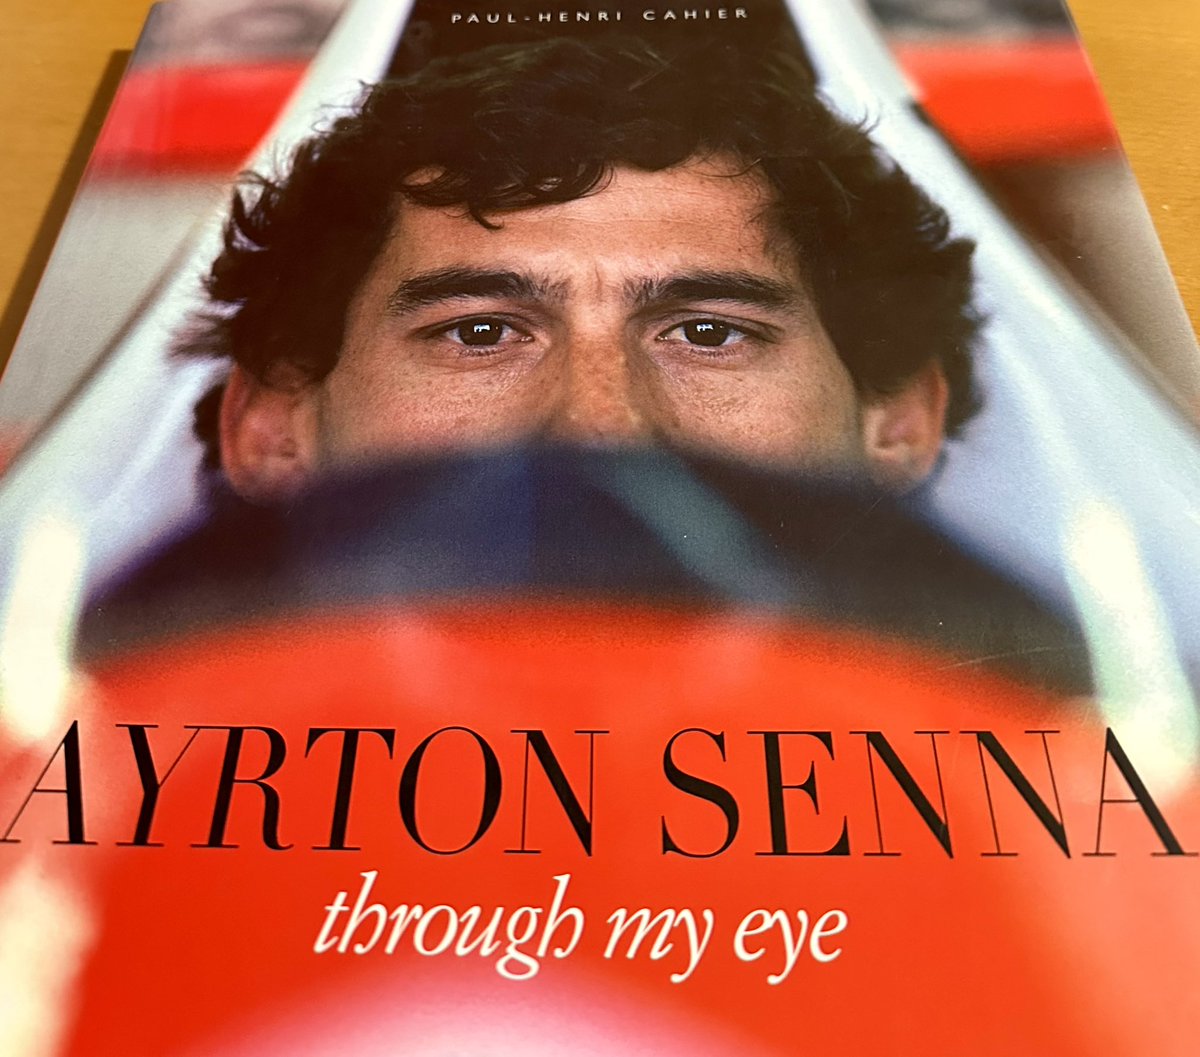 Very happy to have received @F1Photo wonderful book today, a must for every @ayrtonsenna fan like me. Thank you for this fantastic work Paul-Henri Cahier!!